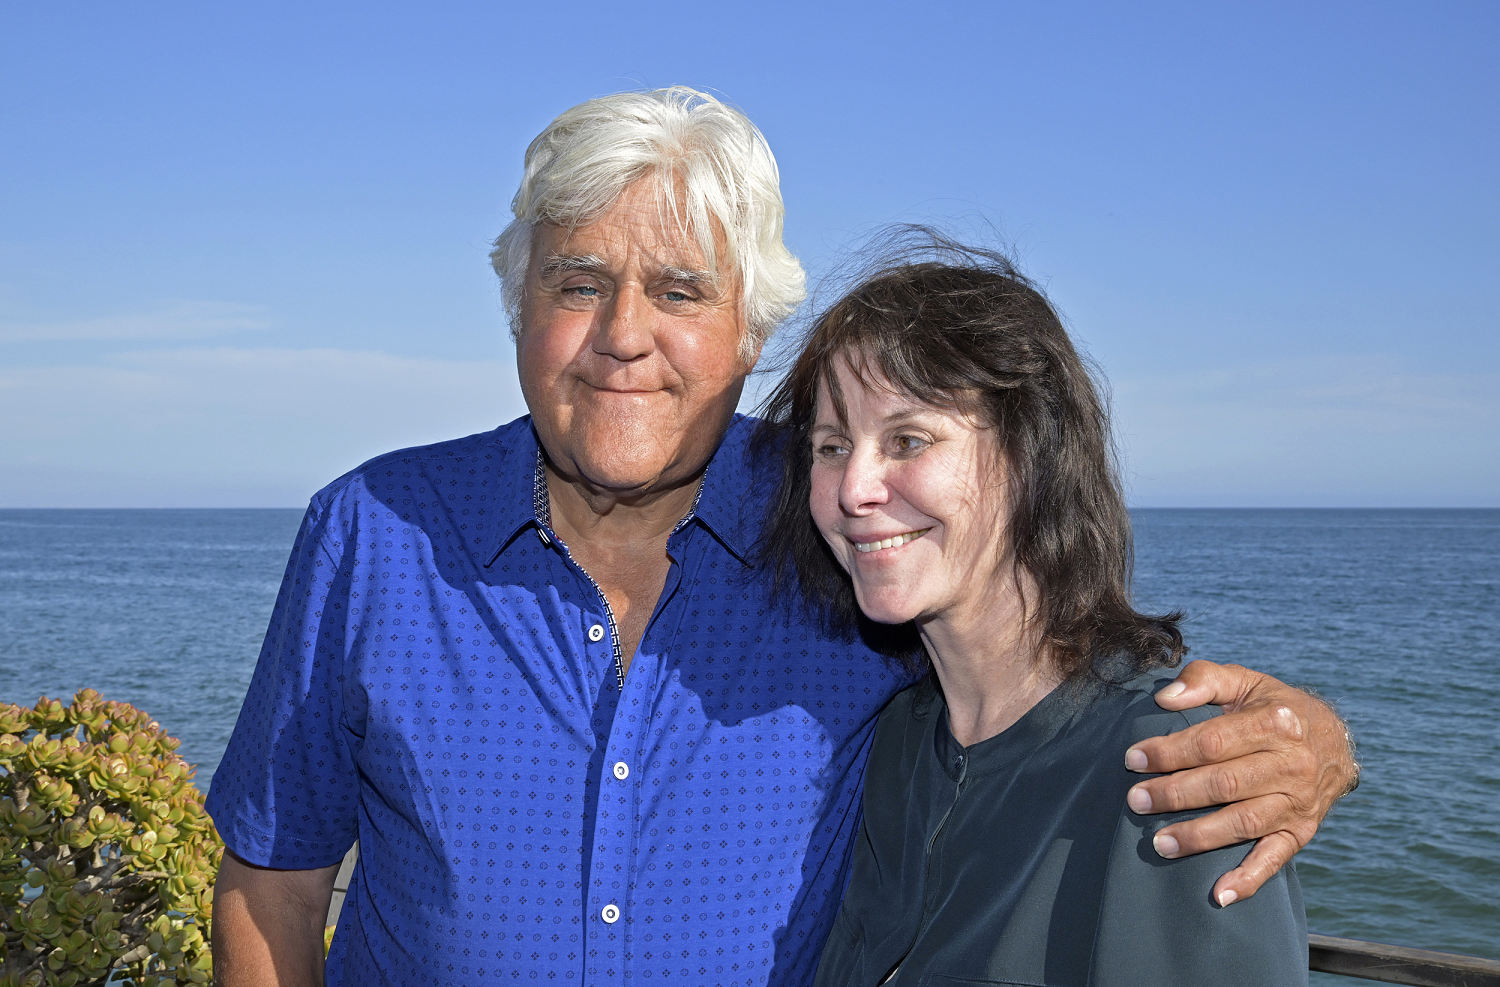 Jay Leno granted conservatorship of his wife's estate following dementia diagnosis